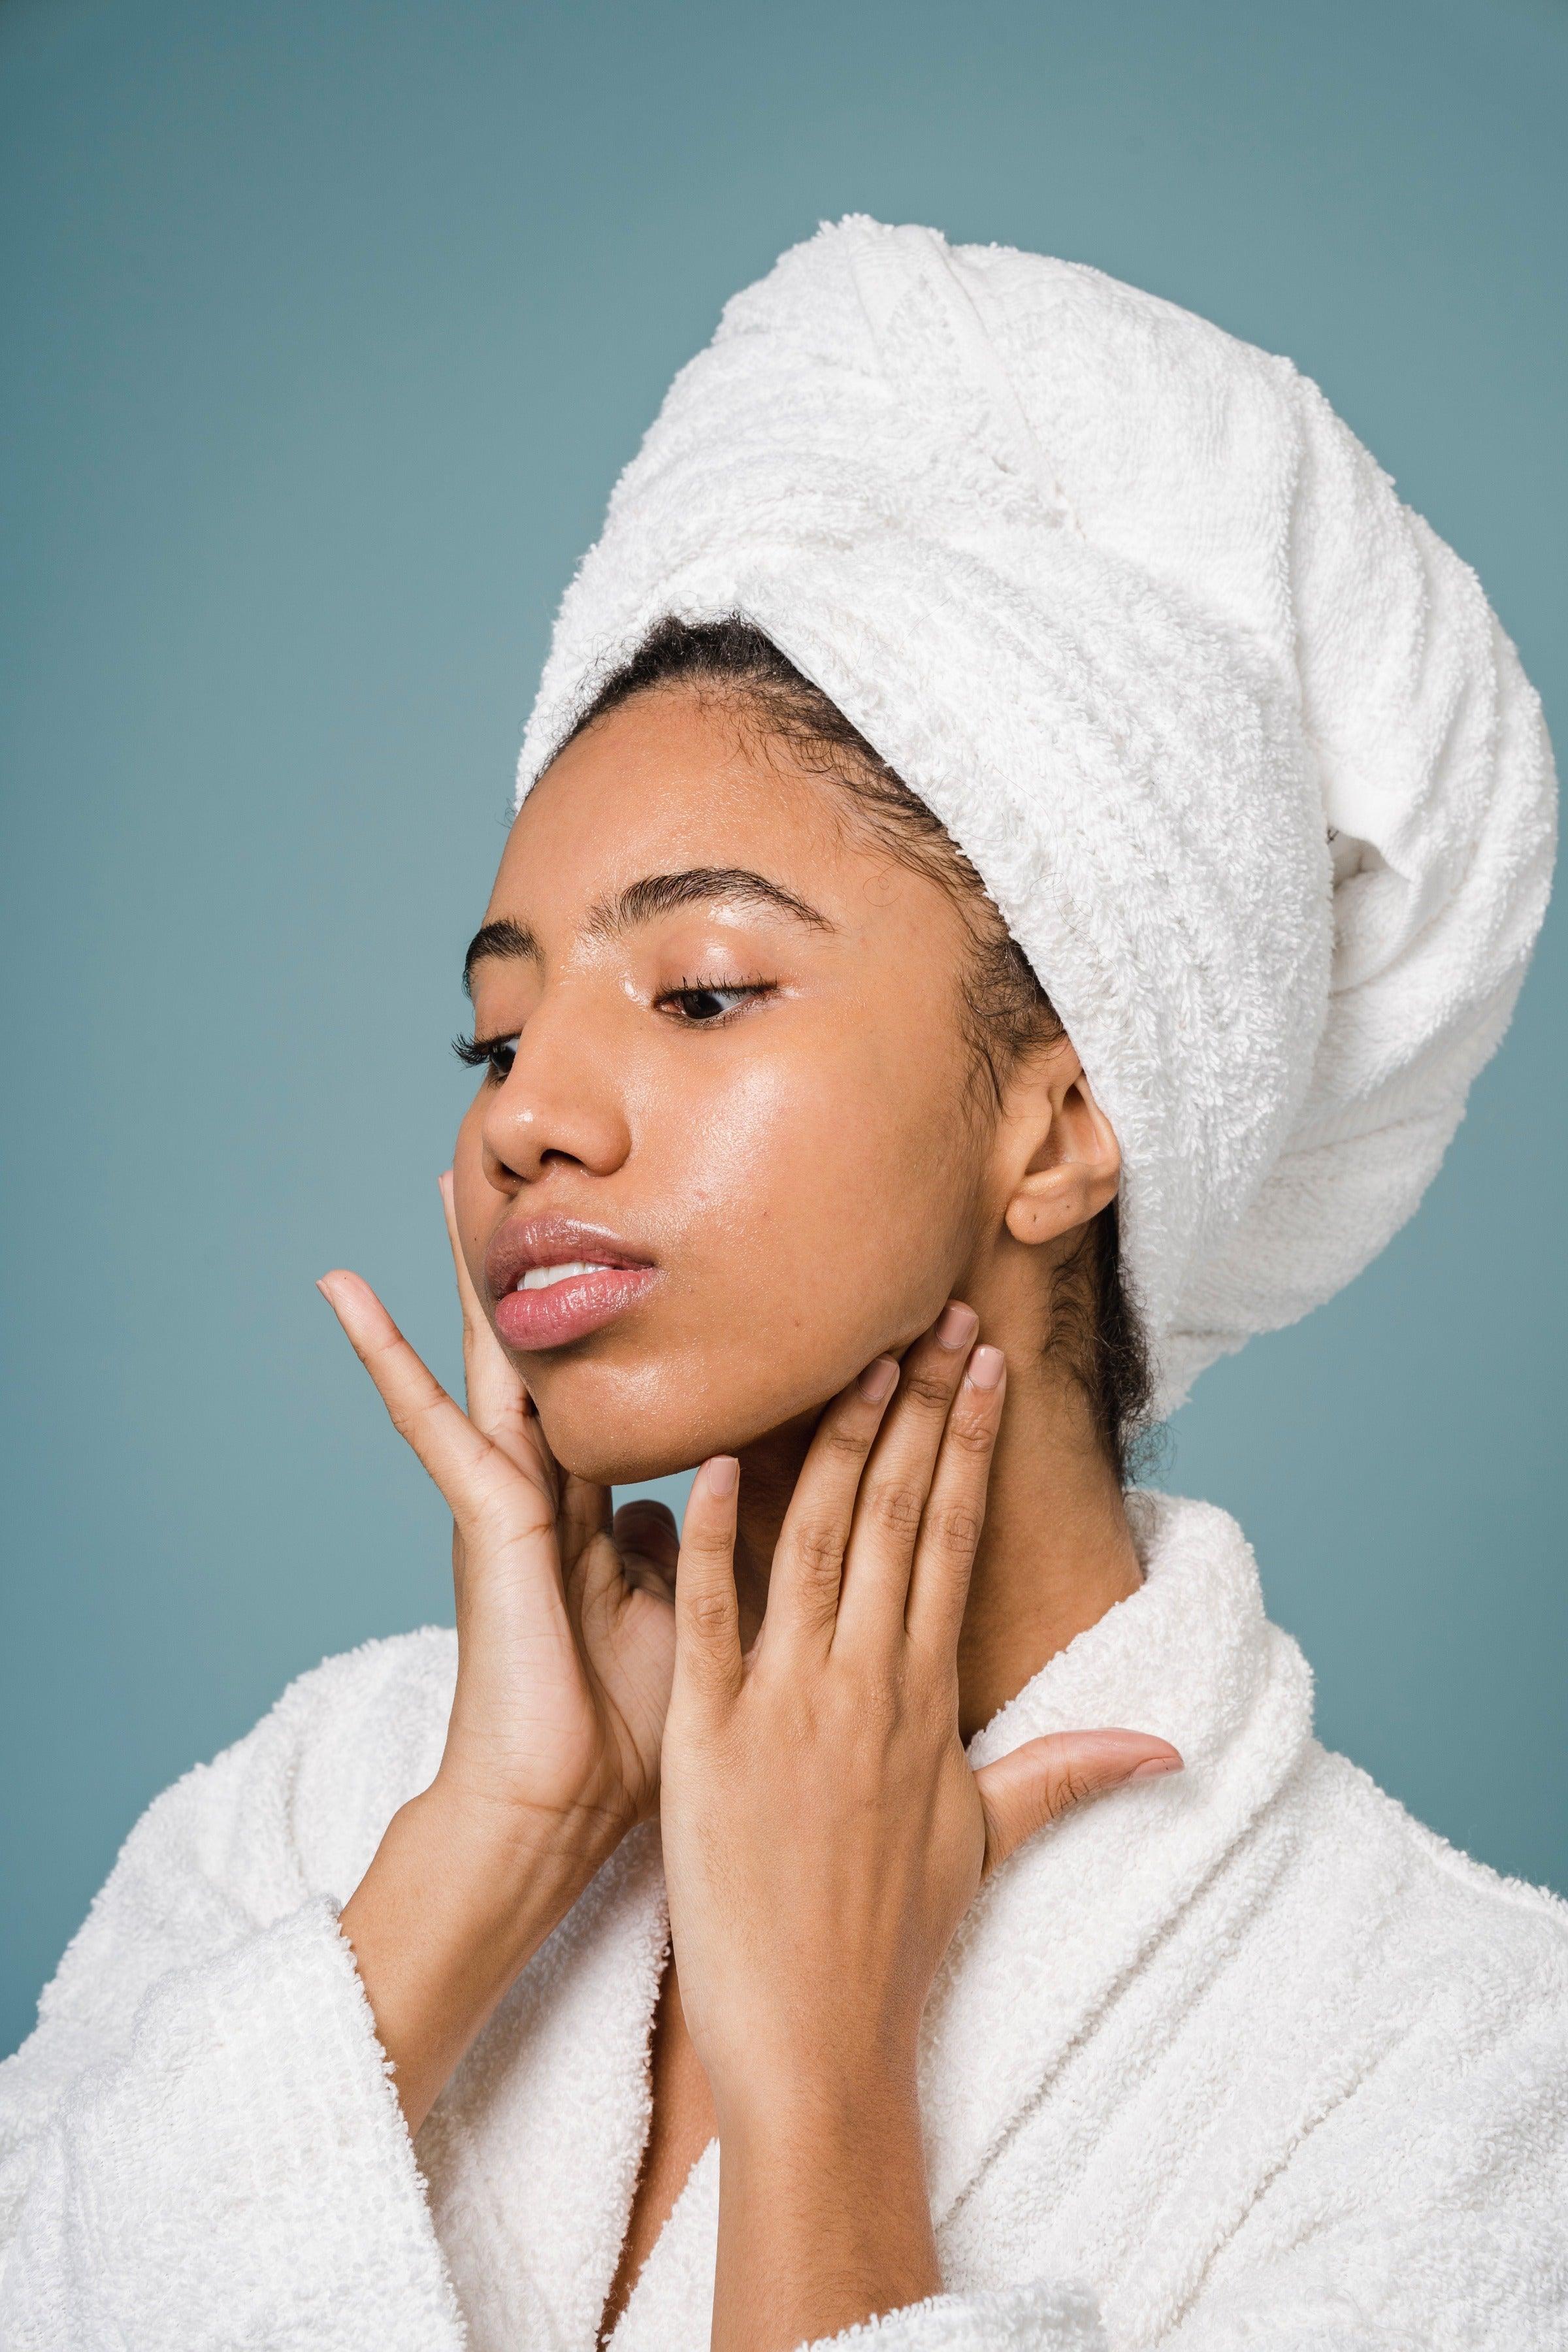 A guide to effective skin exfoliation - fjör